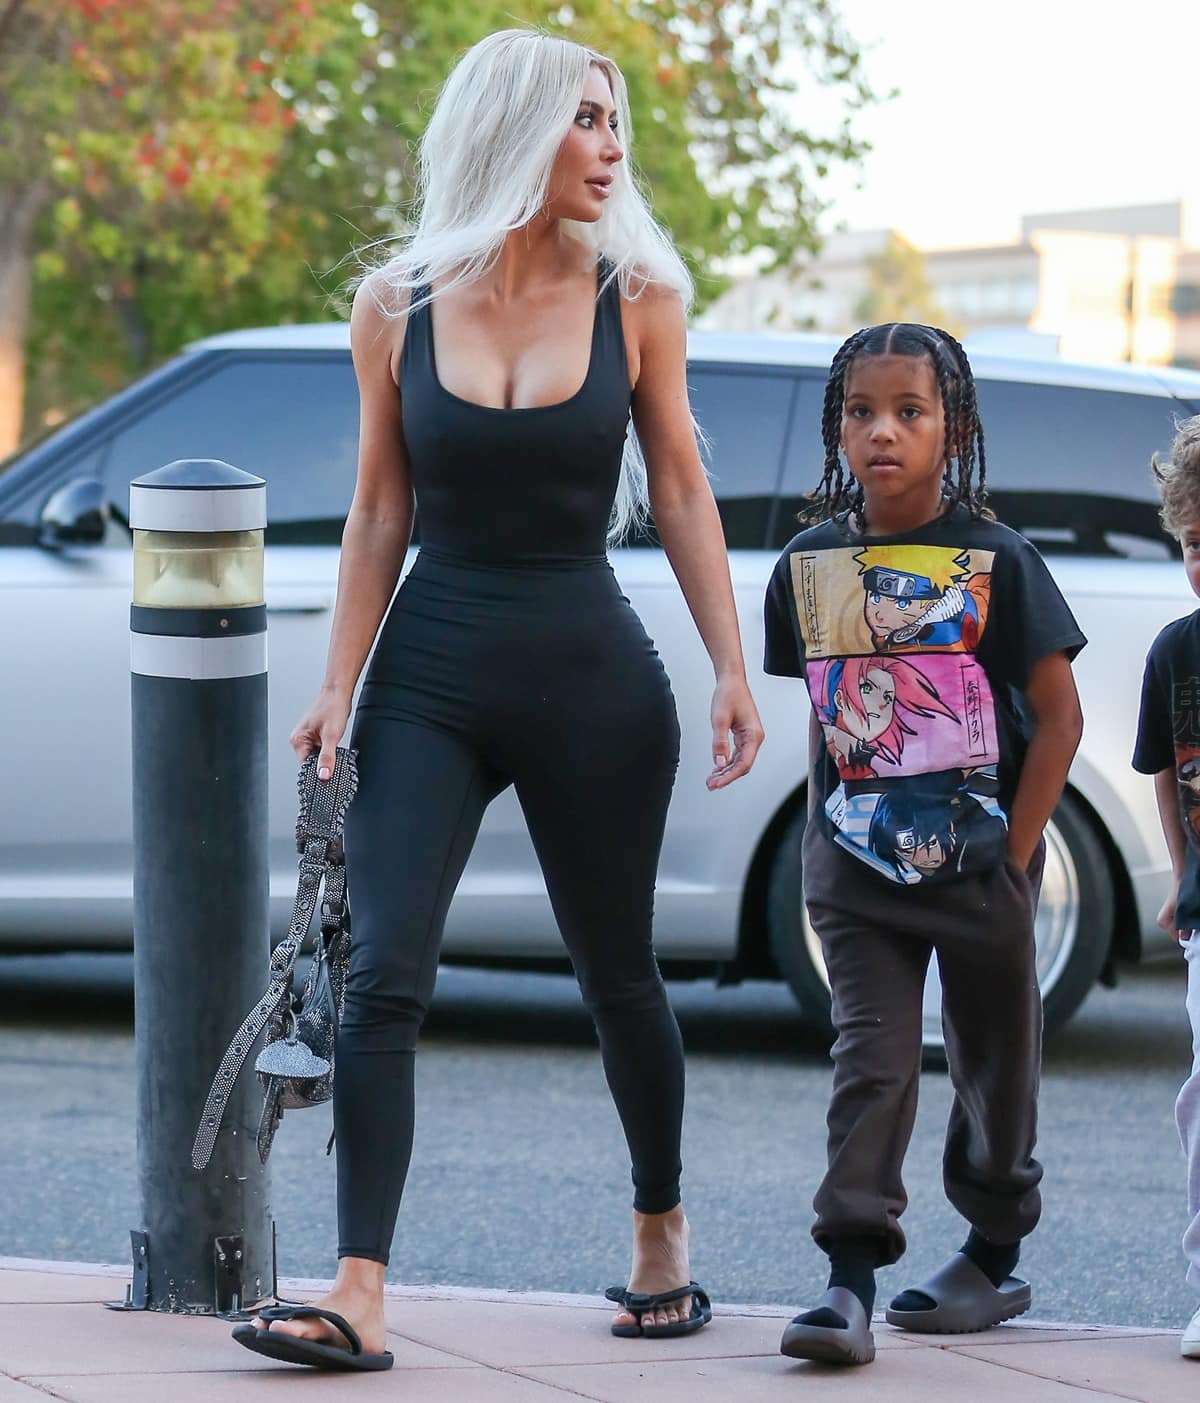 Kim Kardashian arrives with her 6-year-old son, Saint, to watch North's basketball game in Calabasas